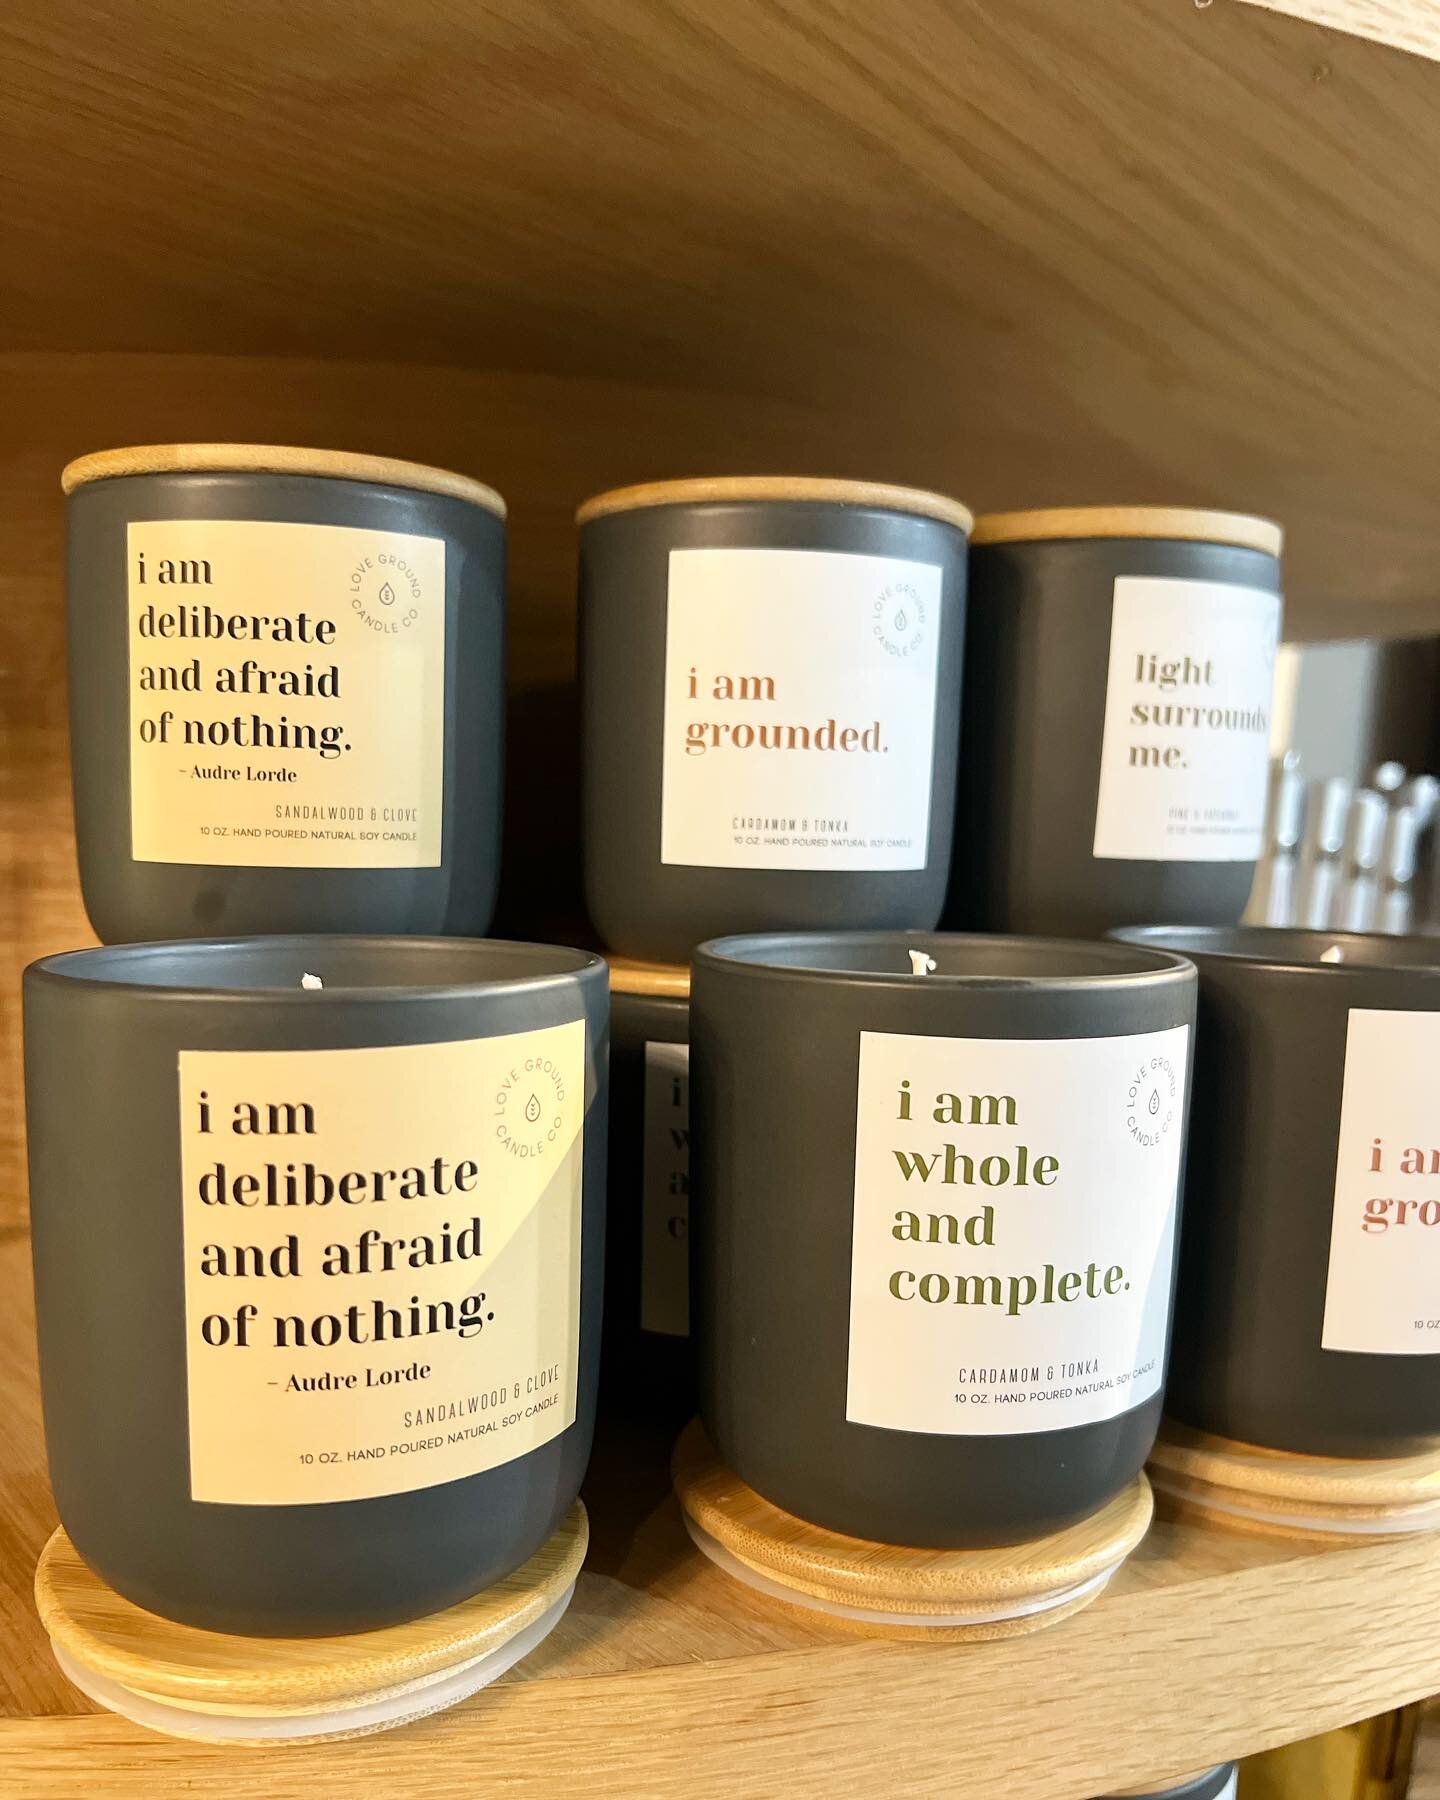 About the Atlanta-based Candle Company — Love Ground Candle Co.